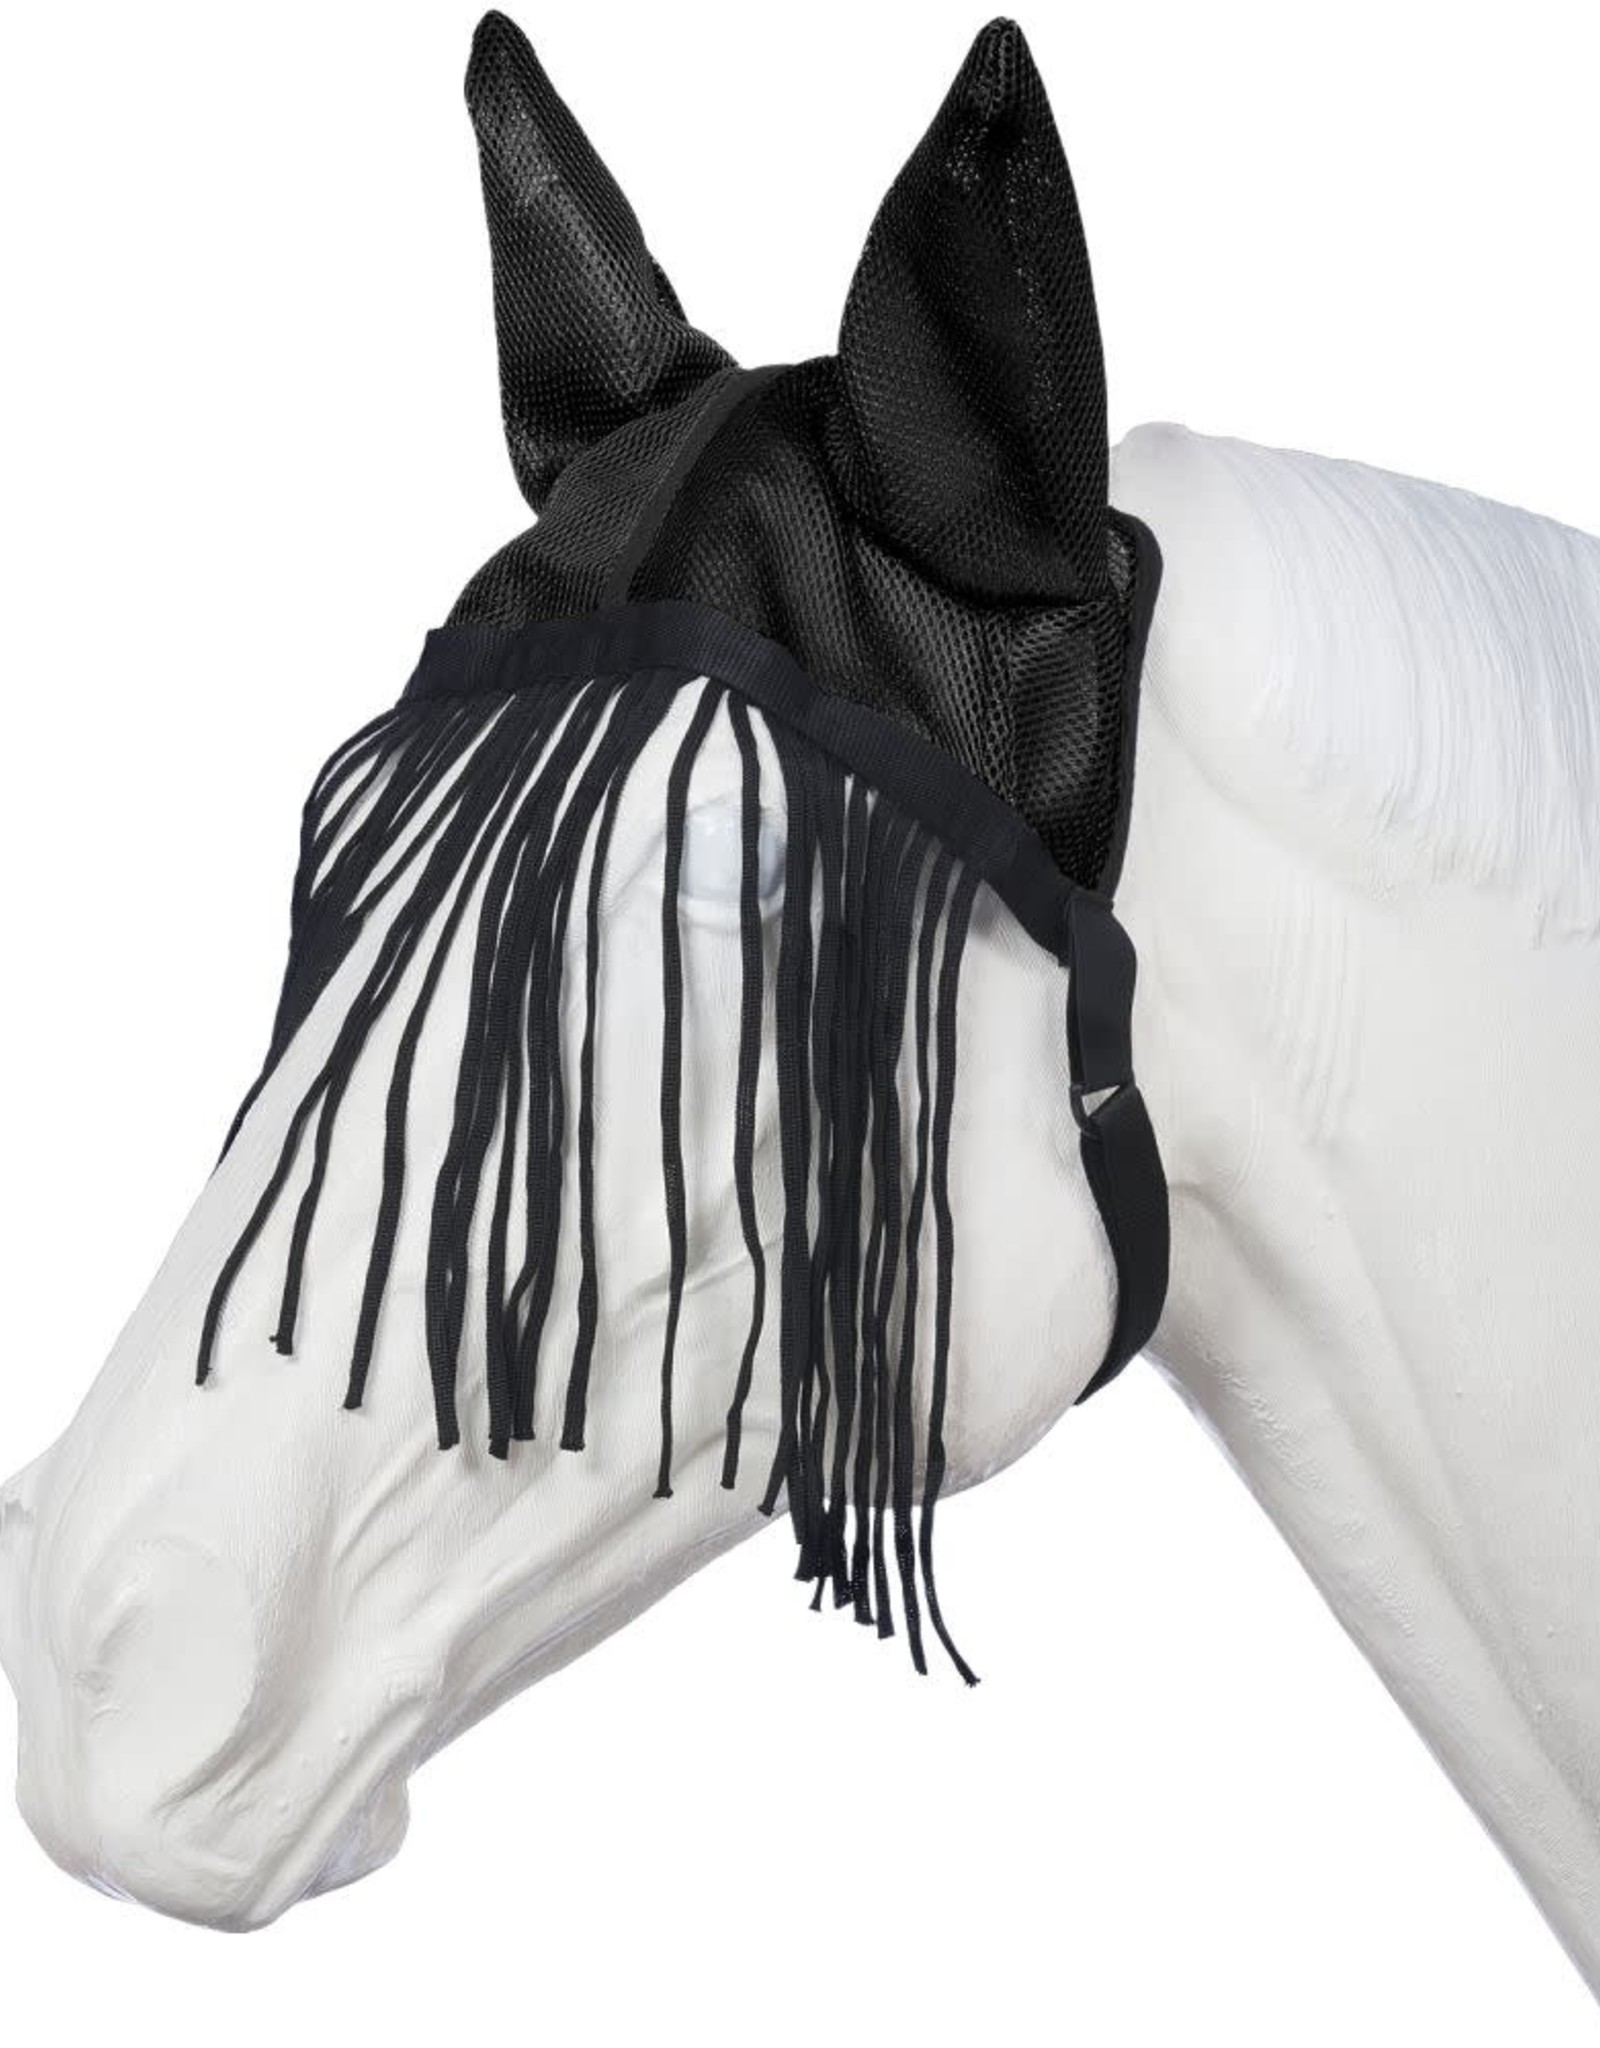 FLY MASK DELUXE COMFORT